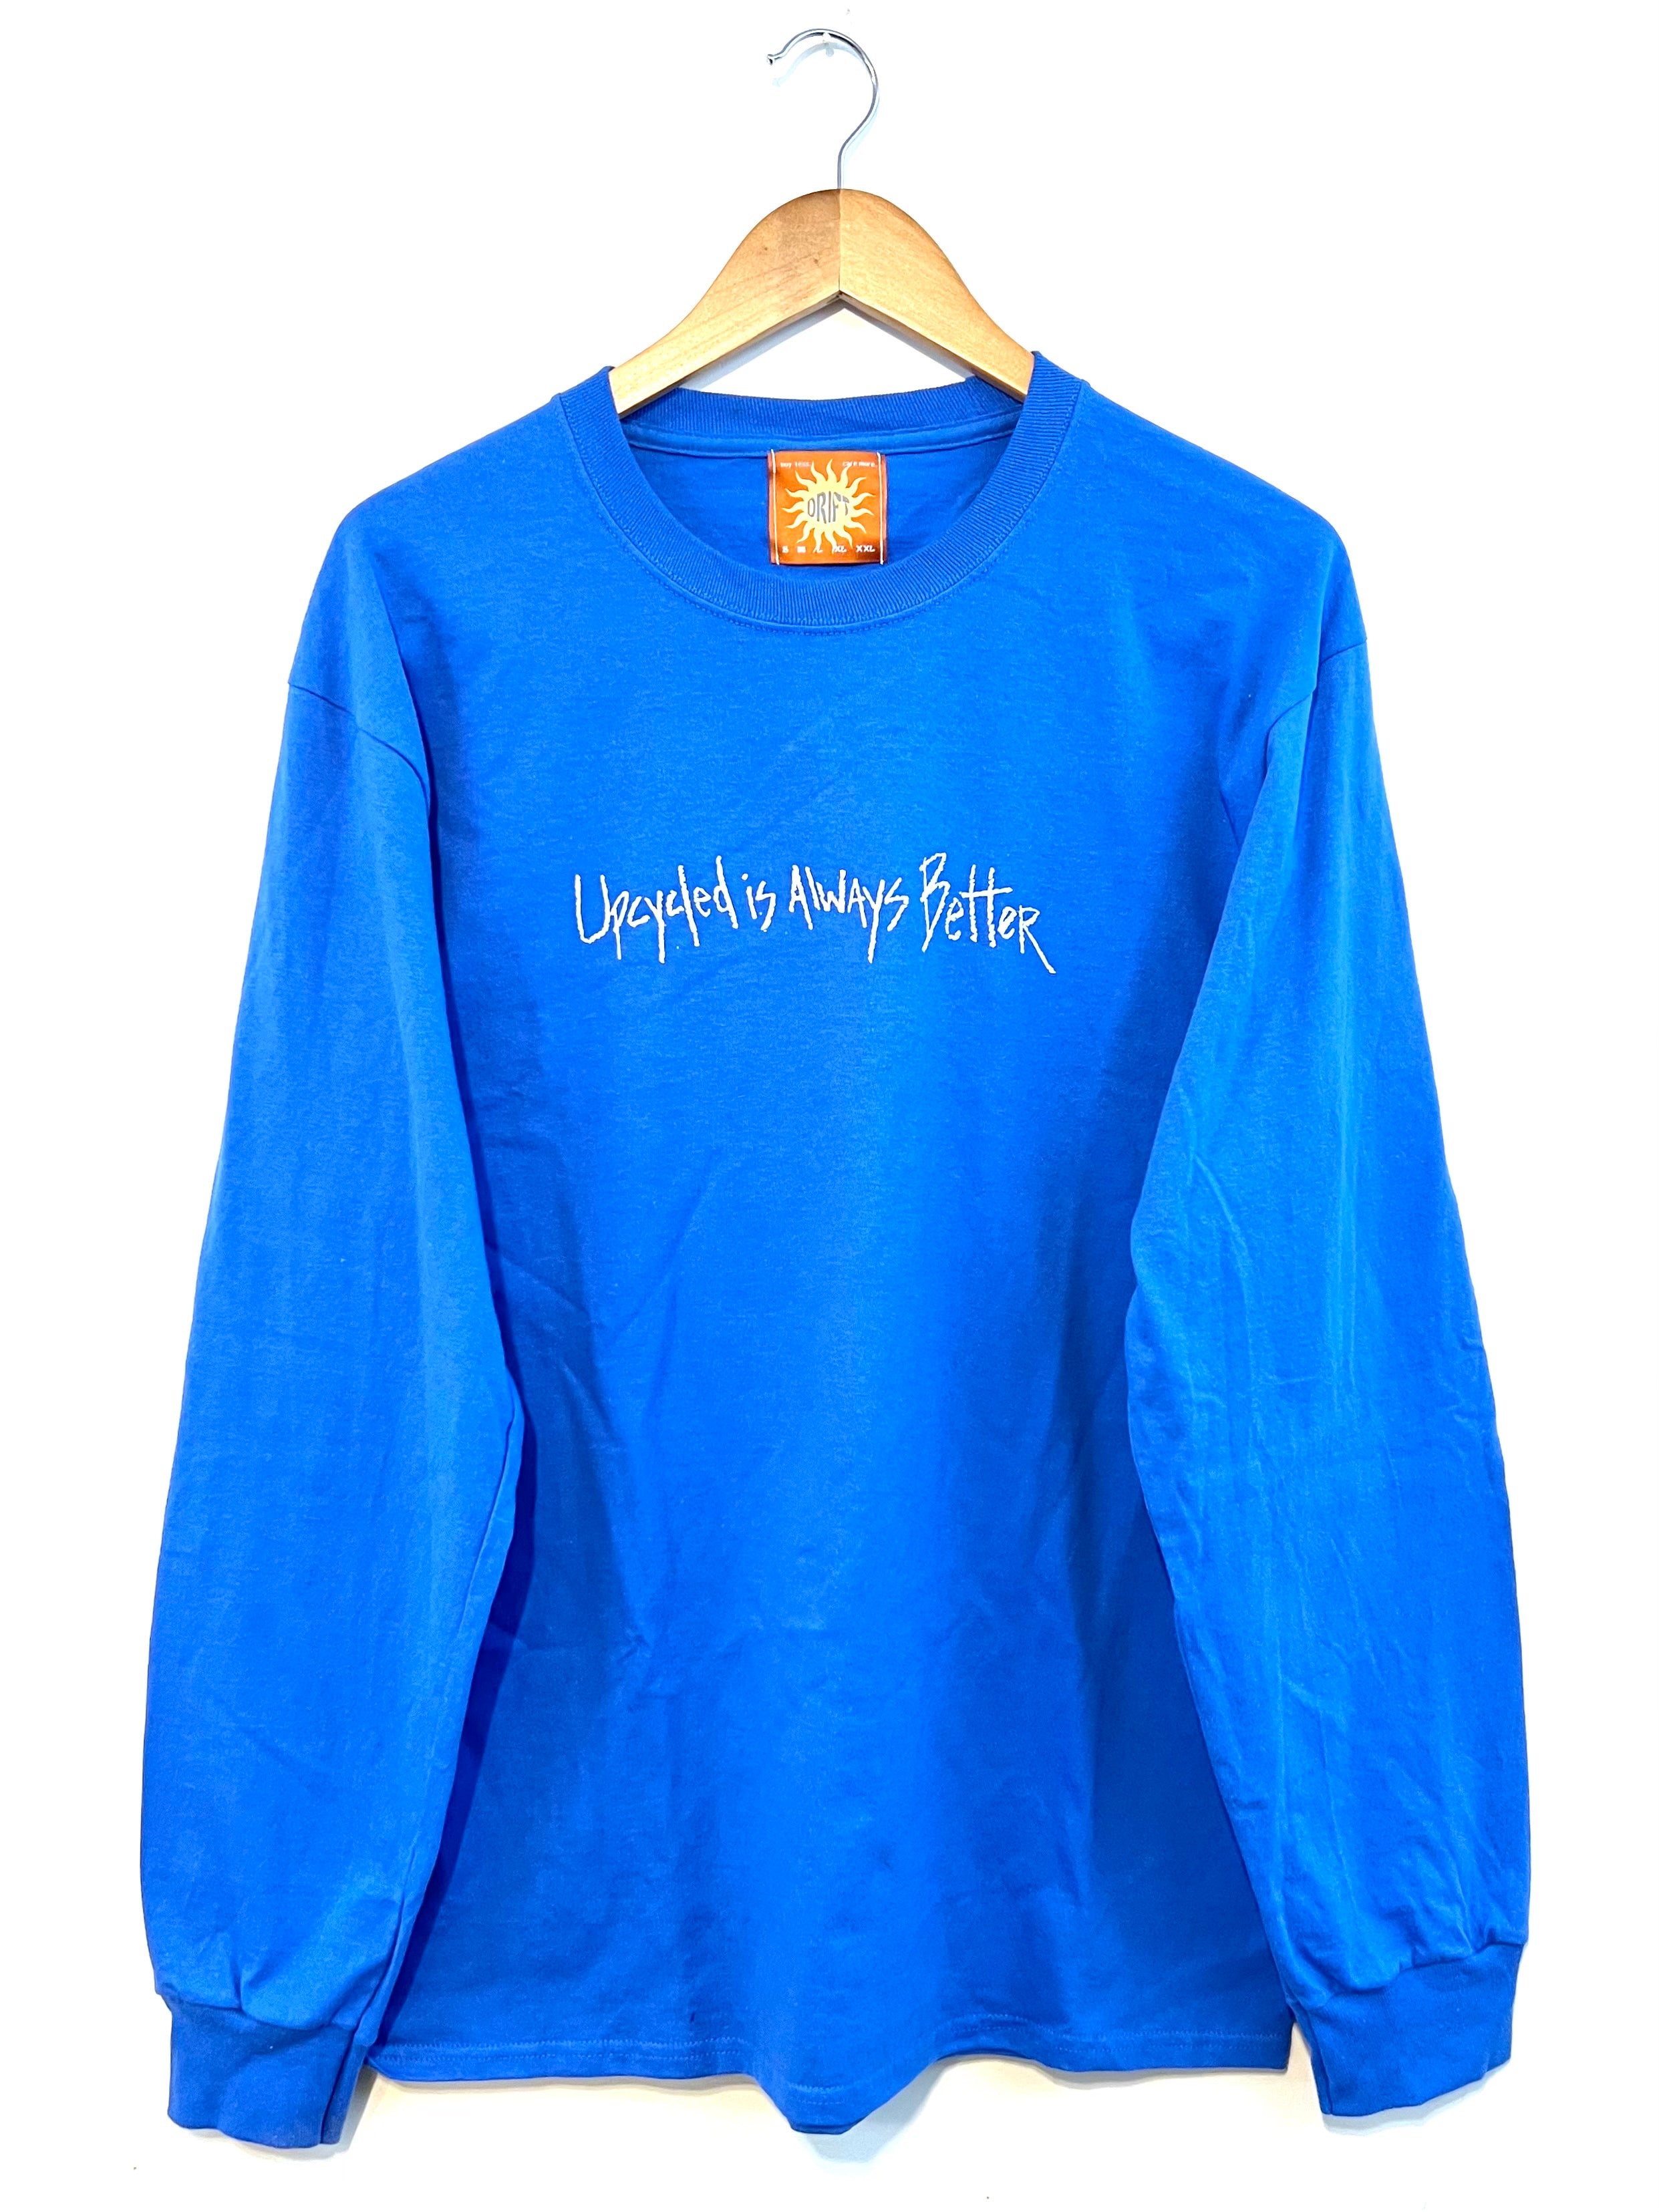 UPCYCLED IS ALWAYS BETTER LONG SLEEVE